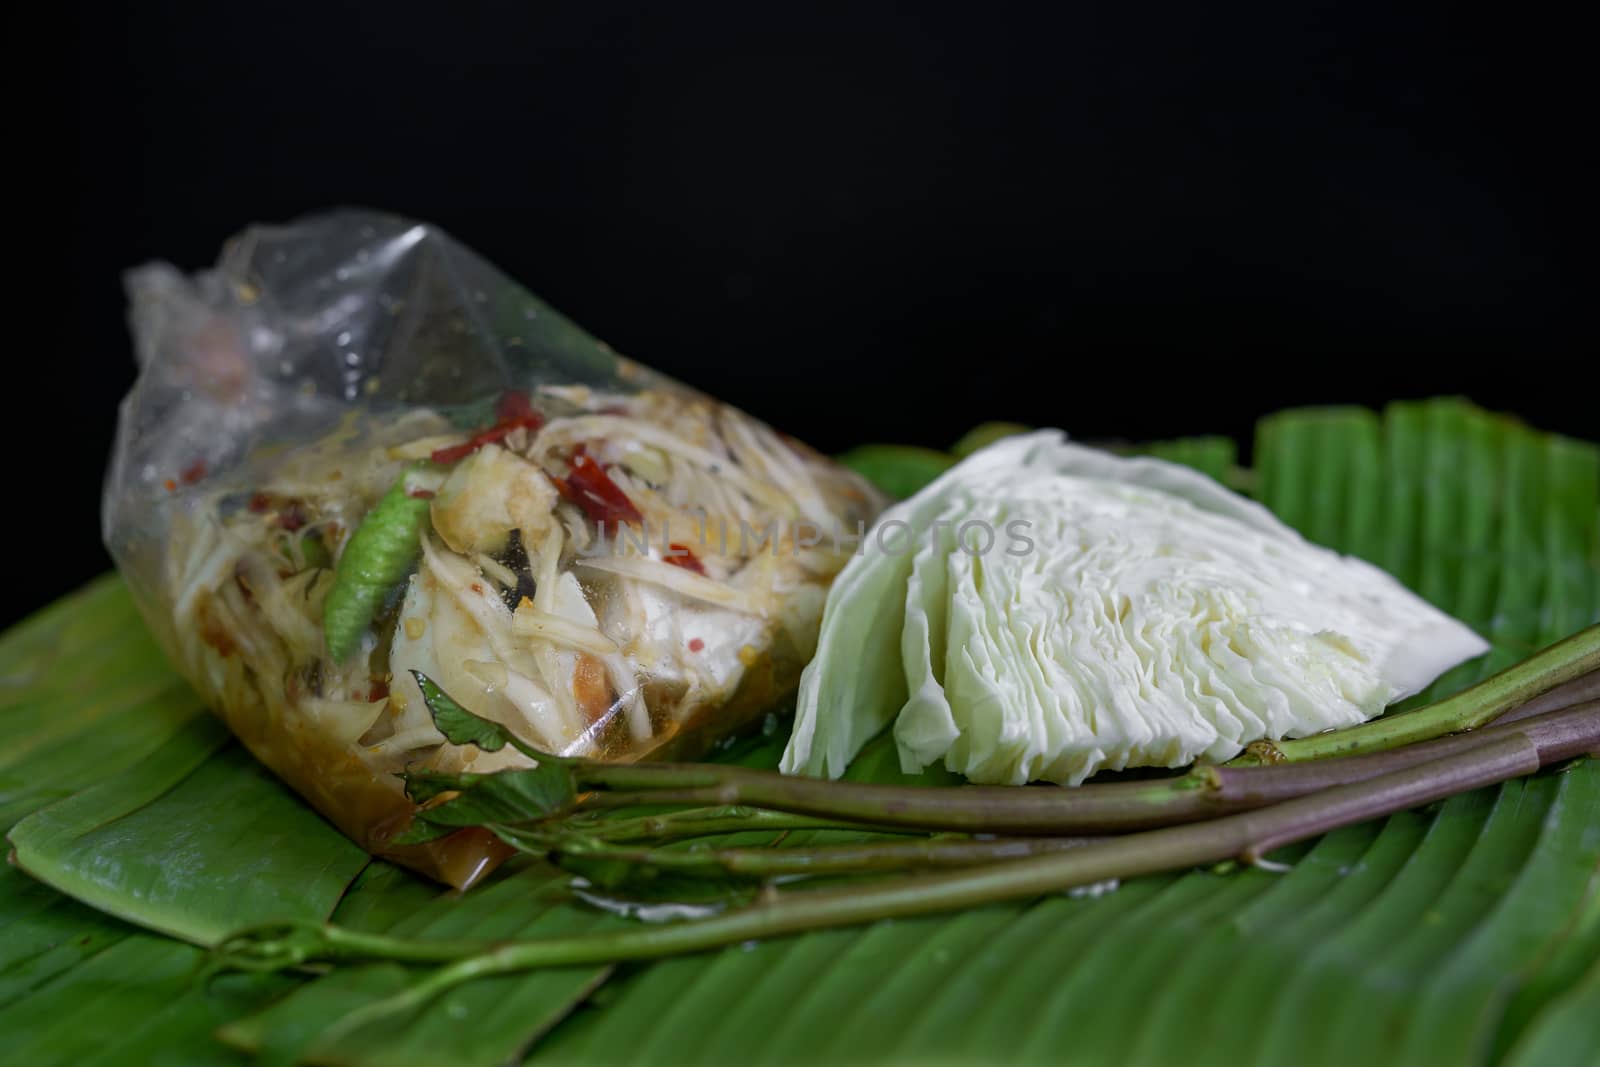 Thai food called papaya salad, pickled fish, salted eggs in a plastic bag and vegetables on a banana leaf, green, black background